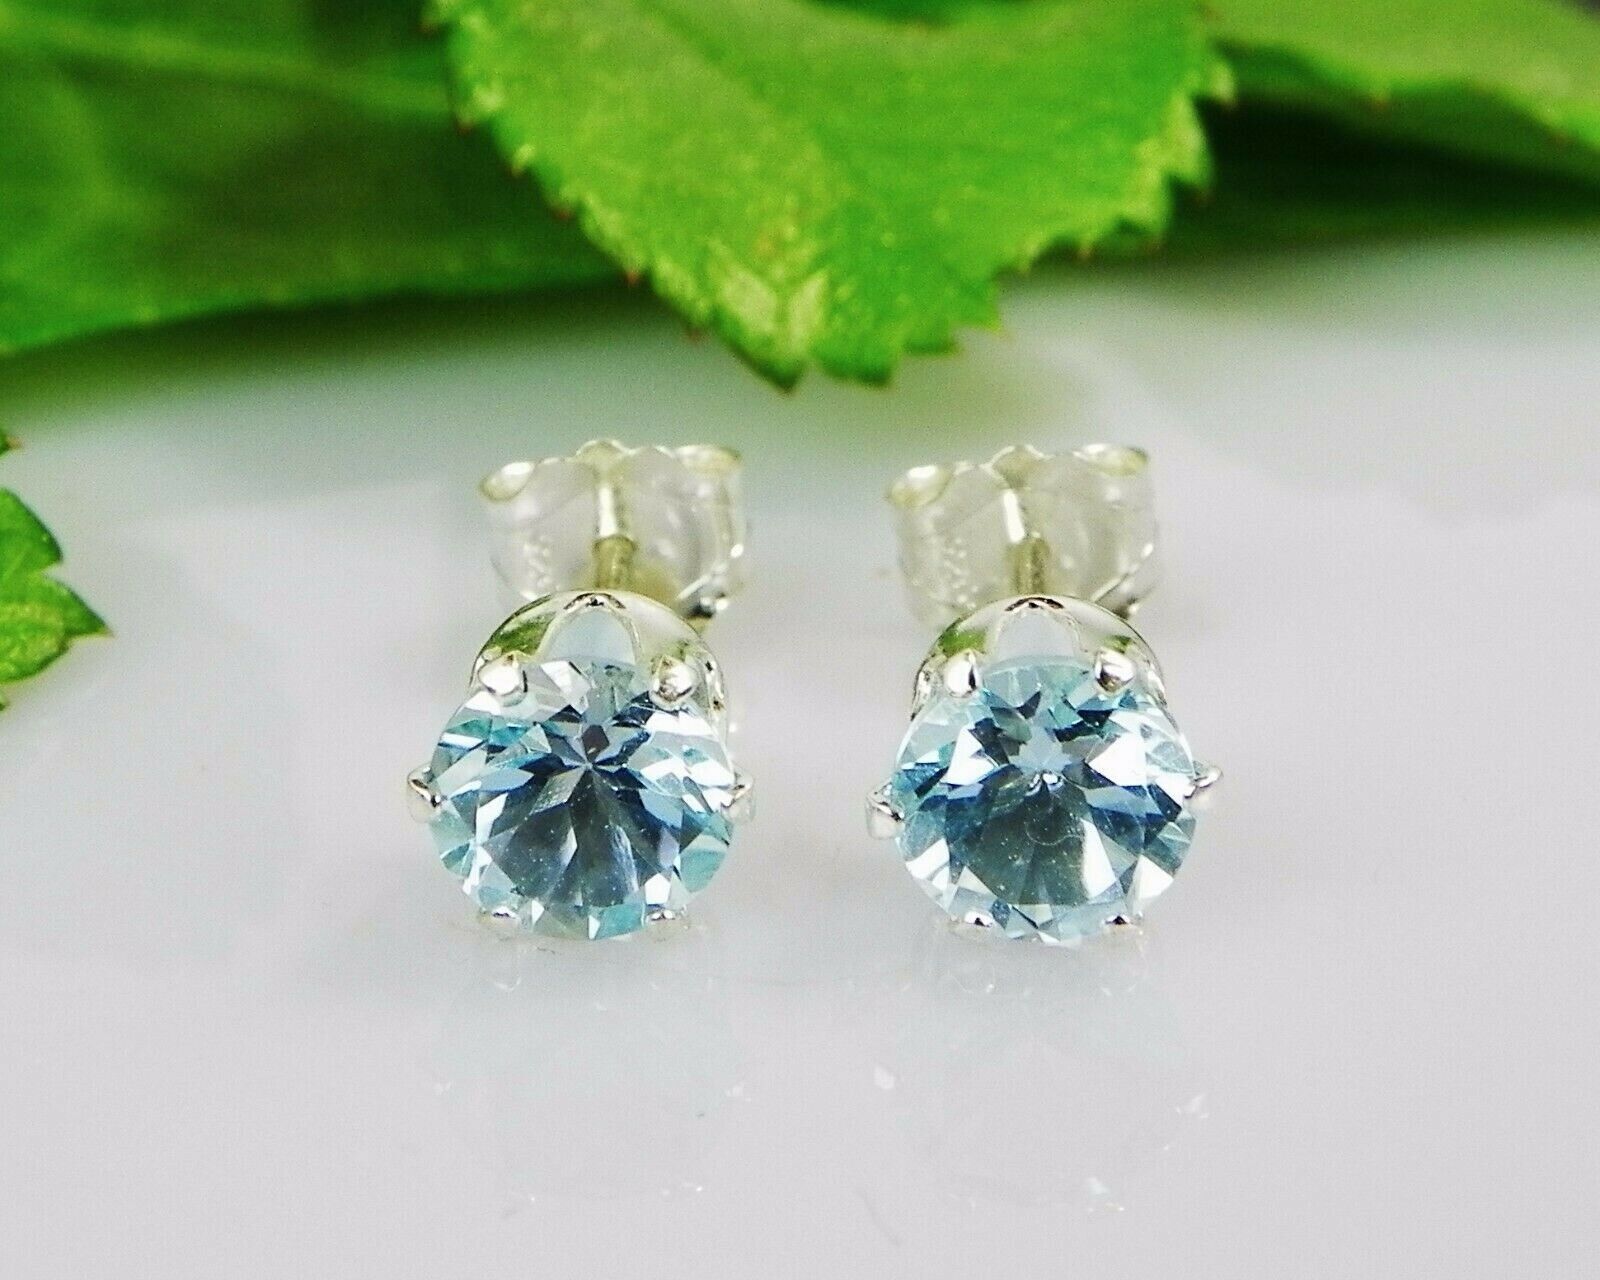 Genuine Sky Blue Topaz Round 925 Sterling Silver Earrings (Choose Your Size) "Handmade by Erika's Delights"